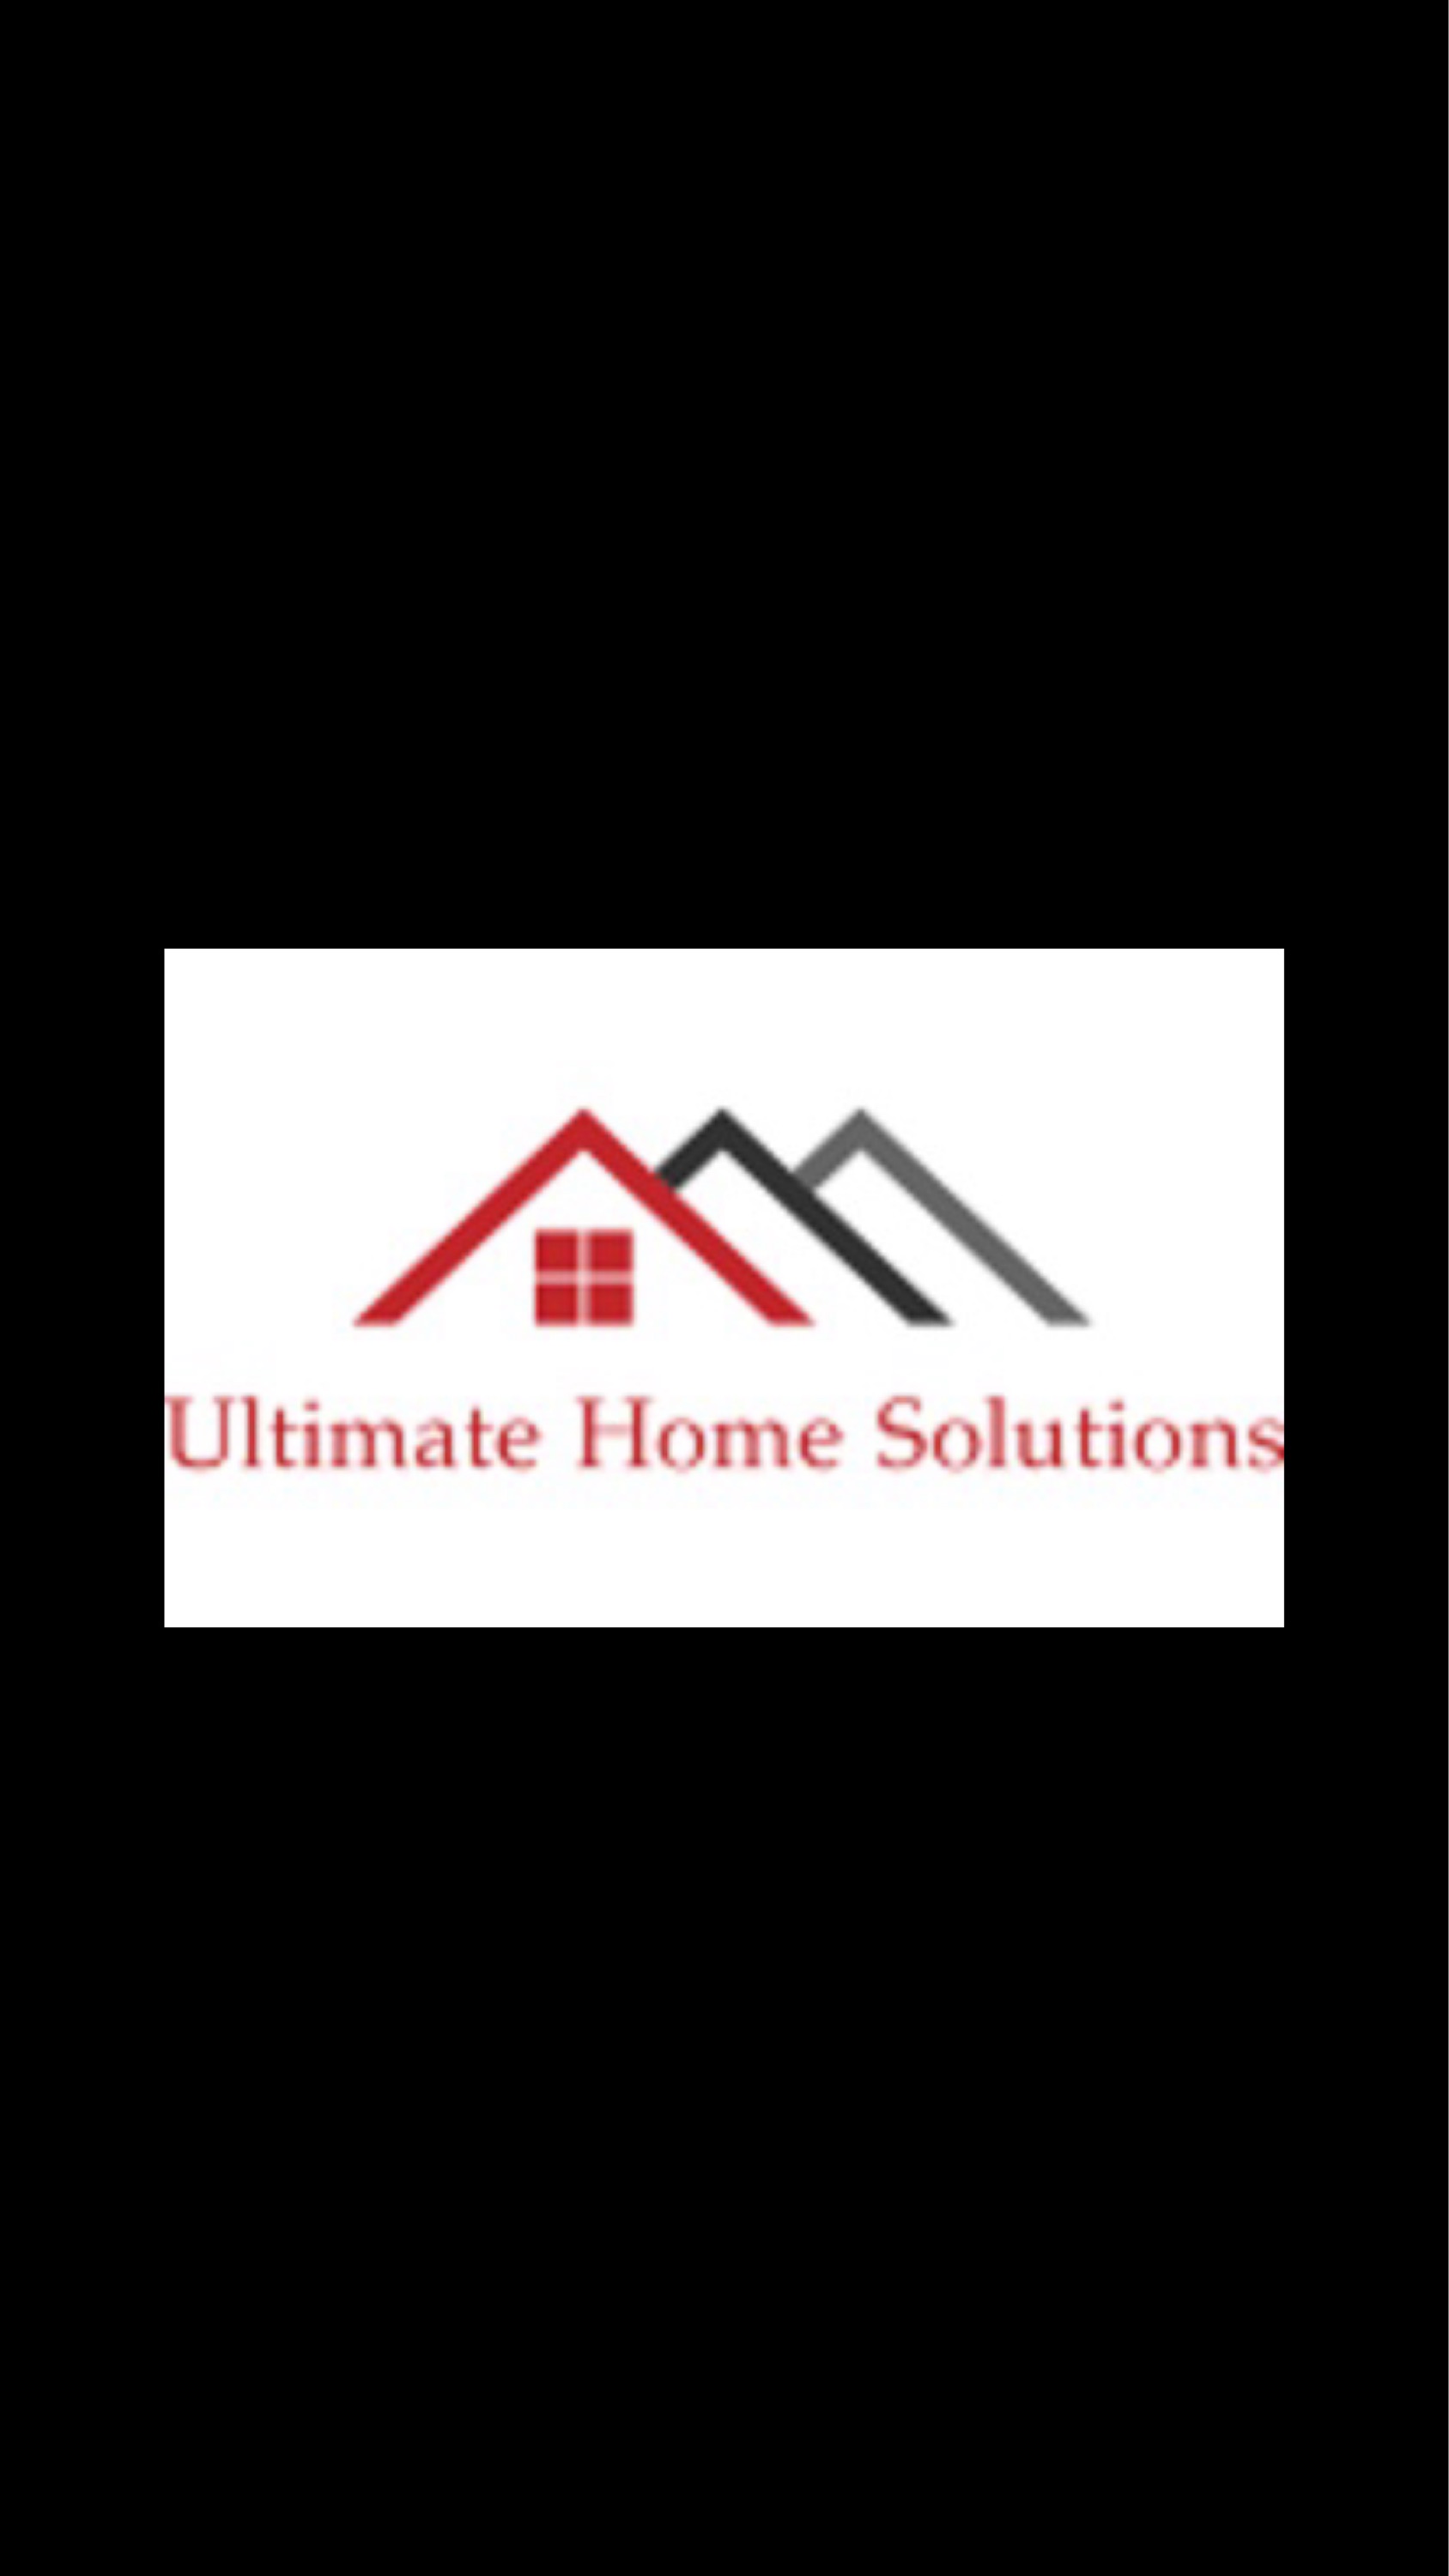 Ultimate Home Solutions Logo